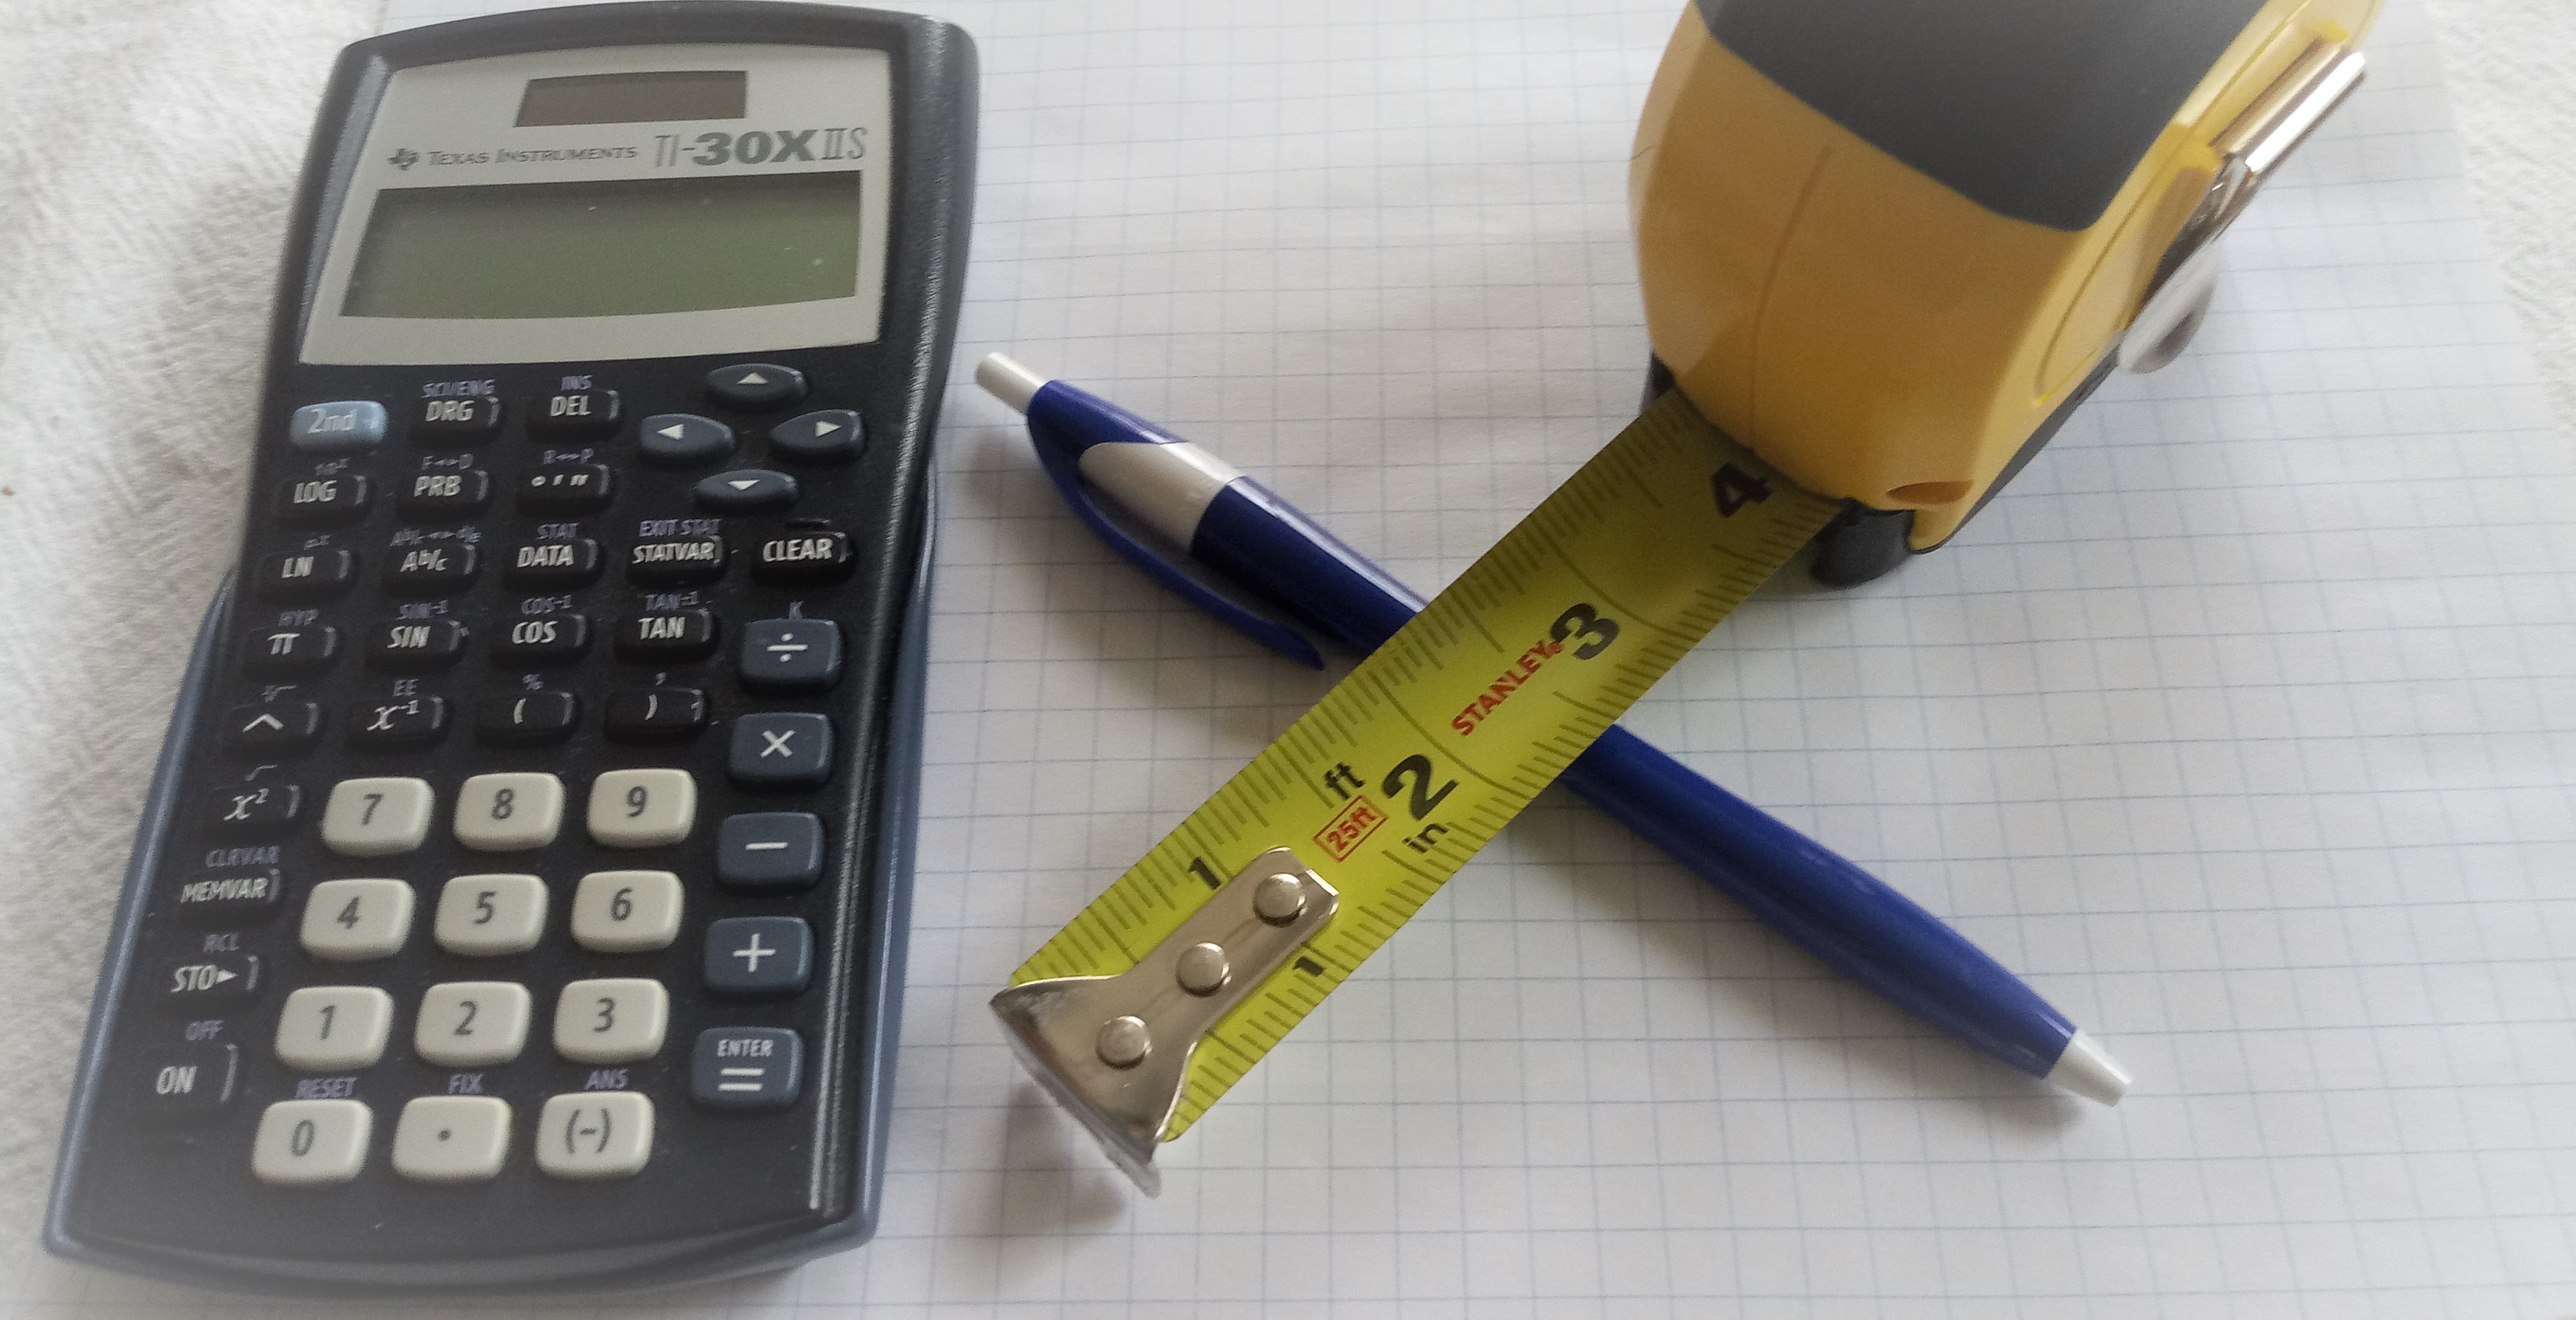 Calculator, pen, and measuring tape on graph paper